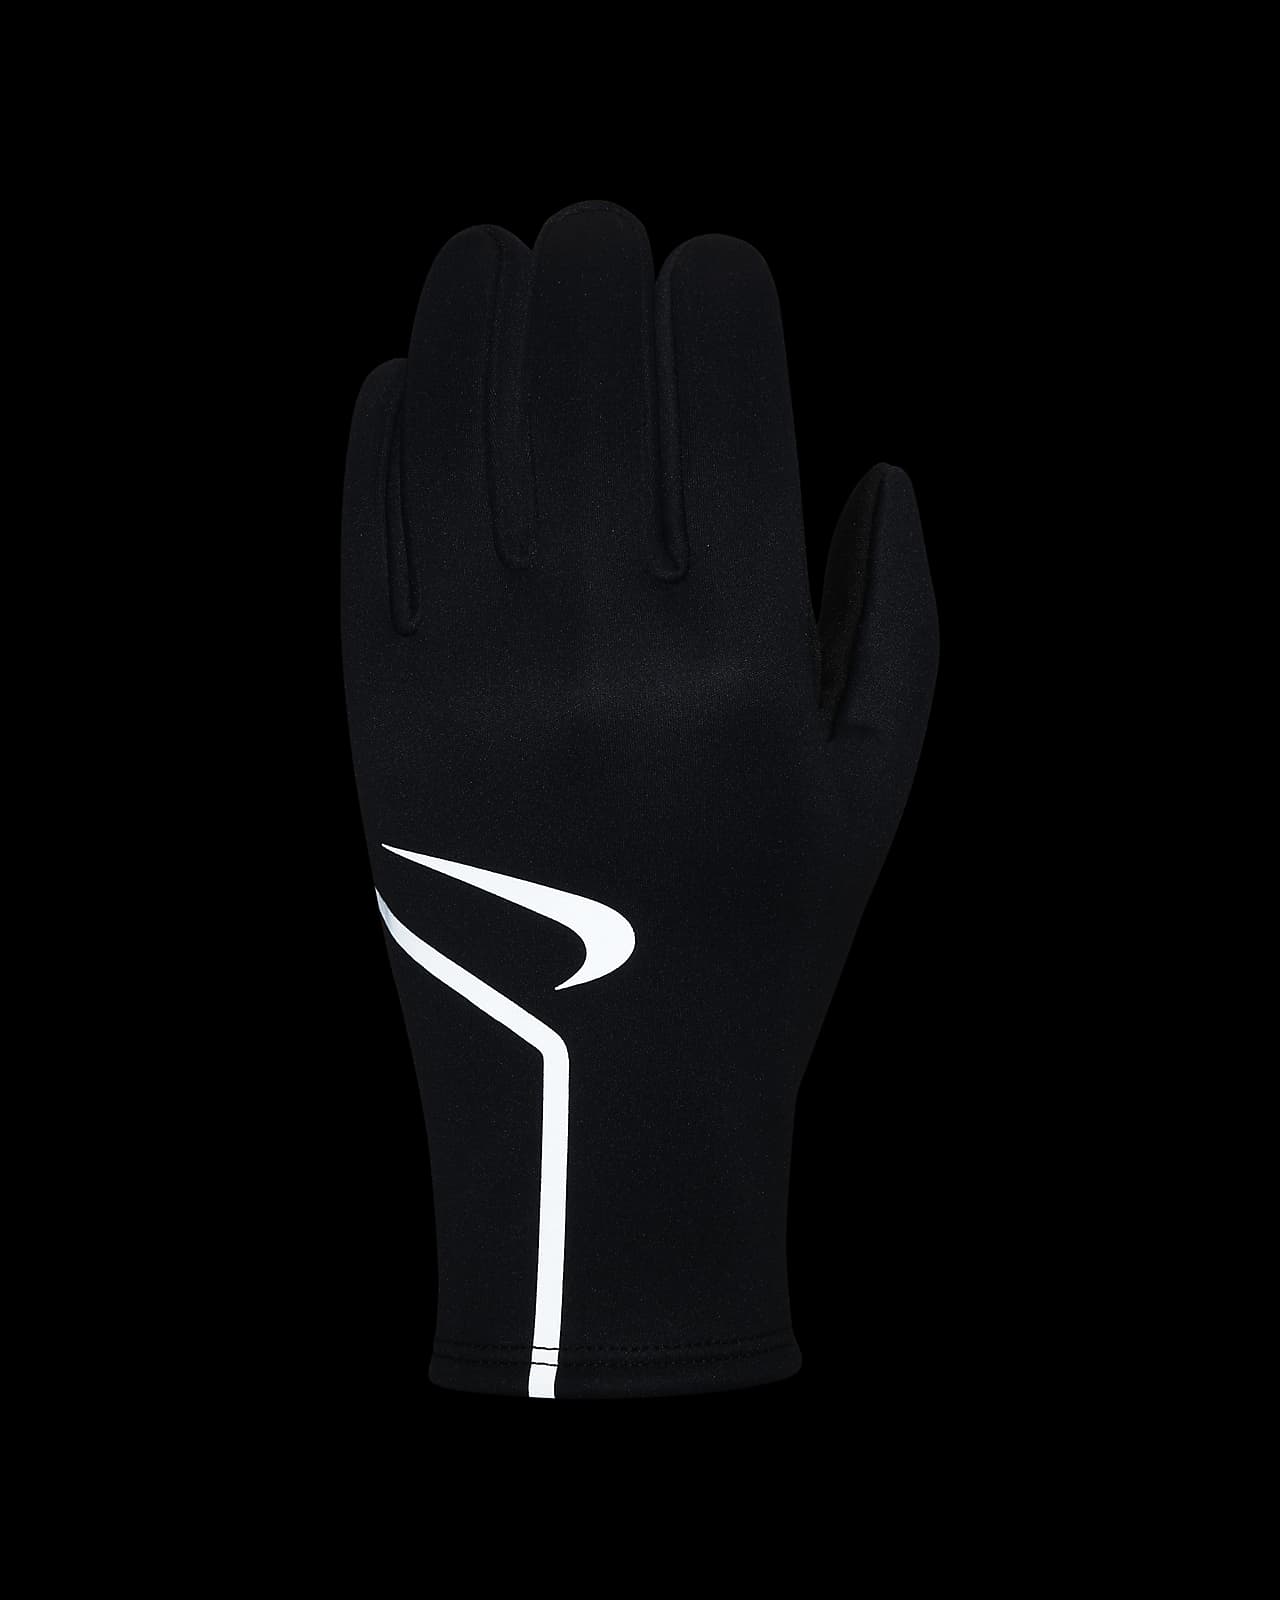 Guantes de running para mujer Nike Therma-FIT Sphere.